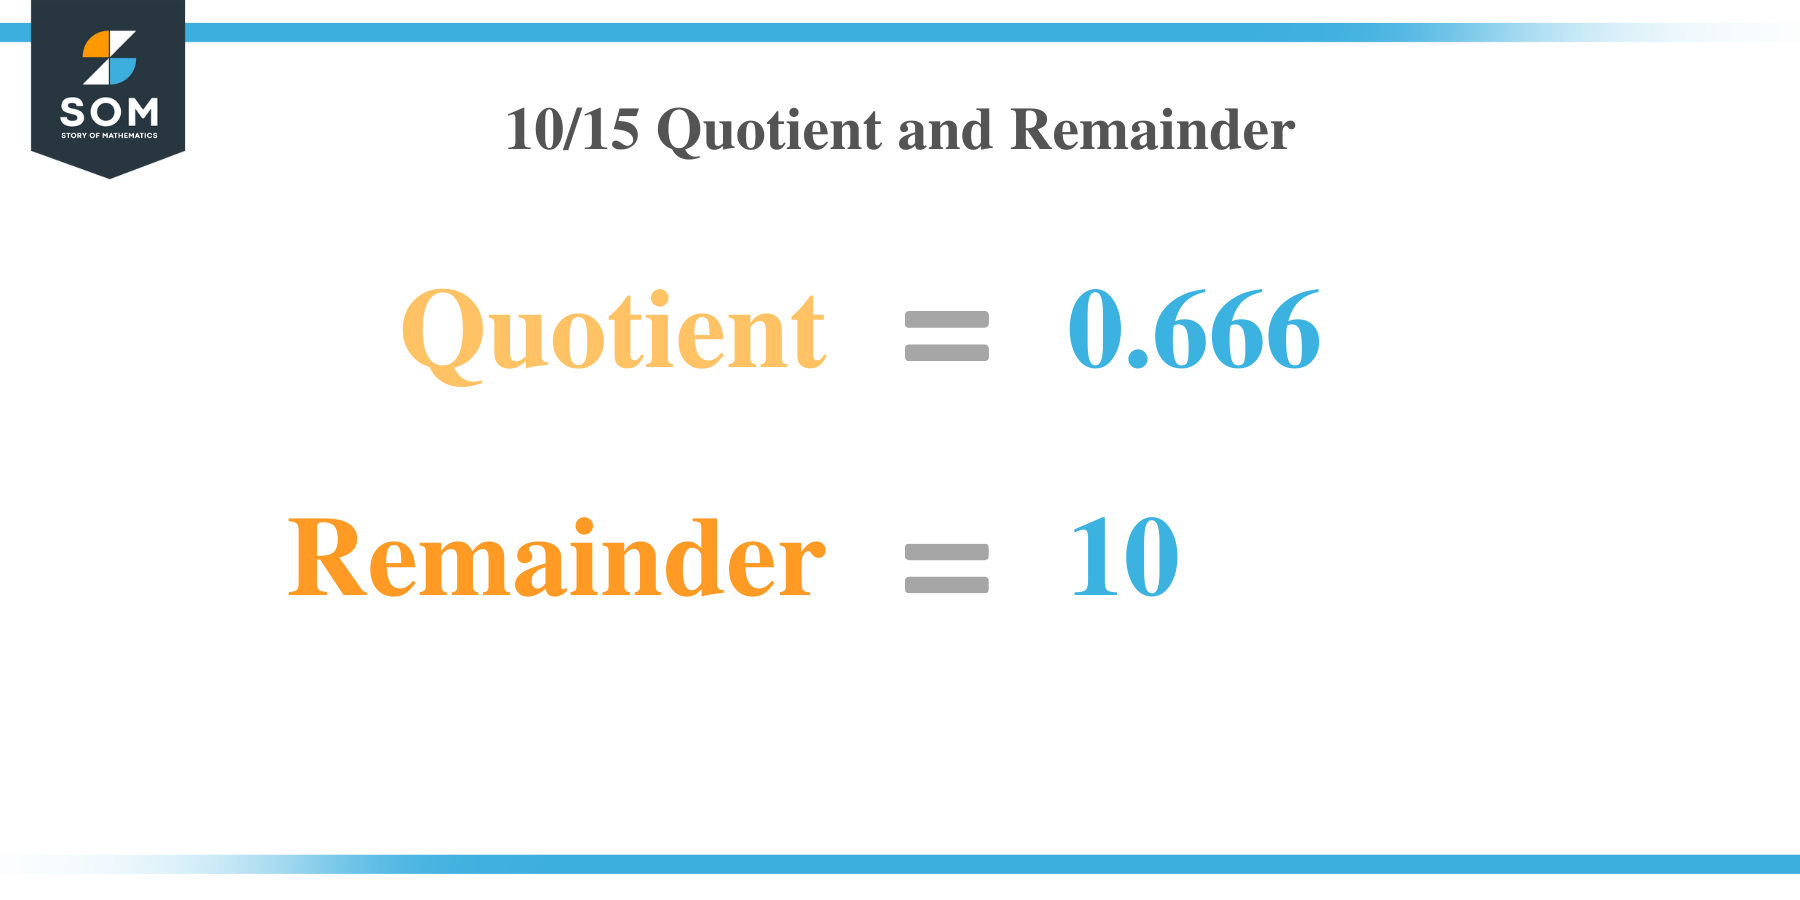 10 by 15 Quotient and Remainder